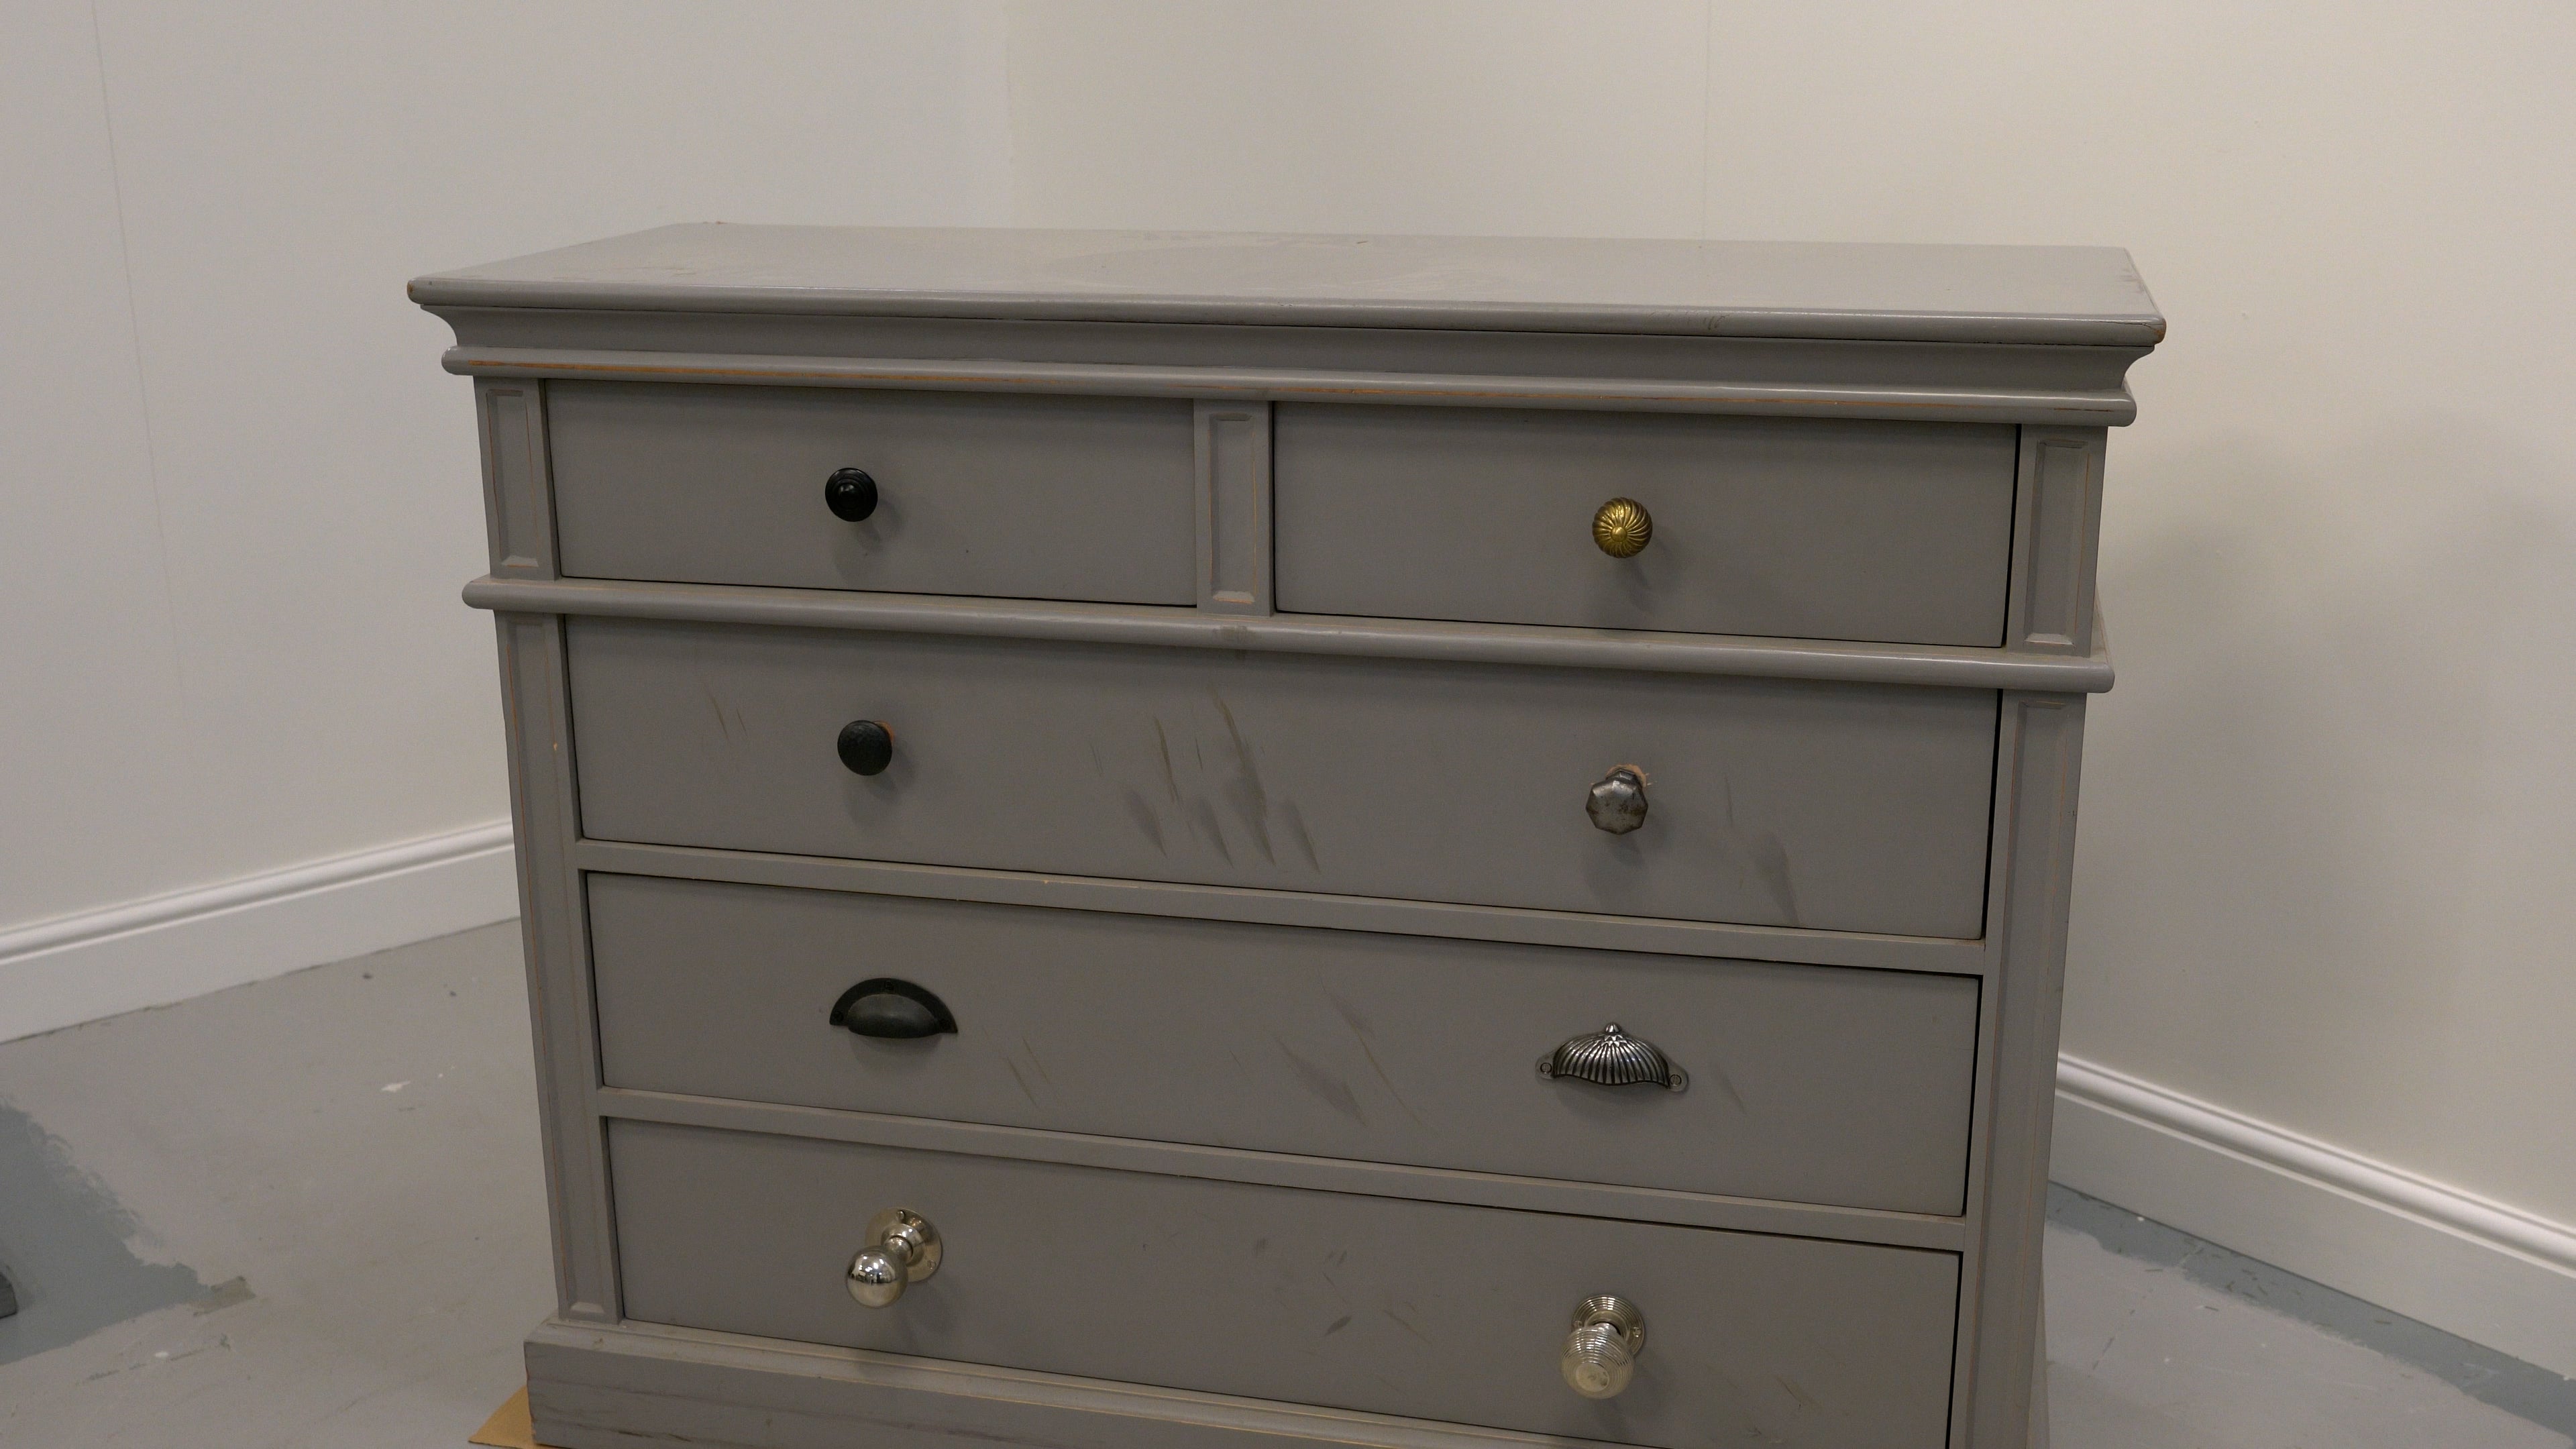 An old, battered chest of draws with mis-matched hardware and lots of scratches.